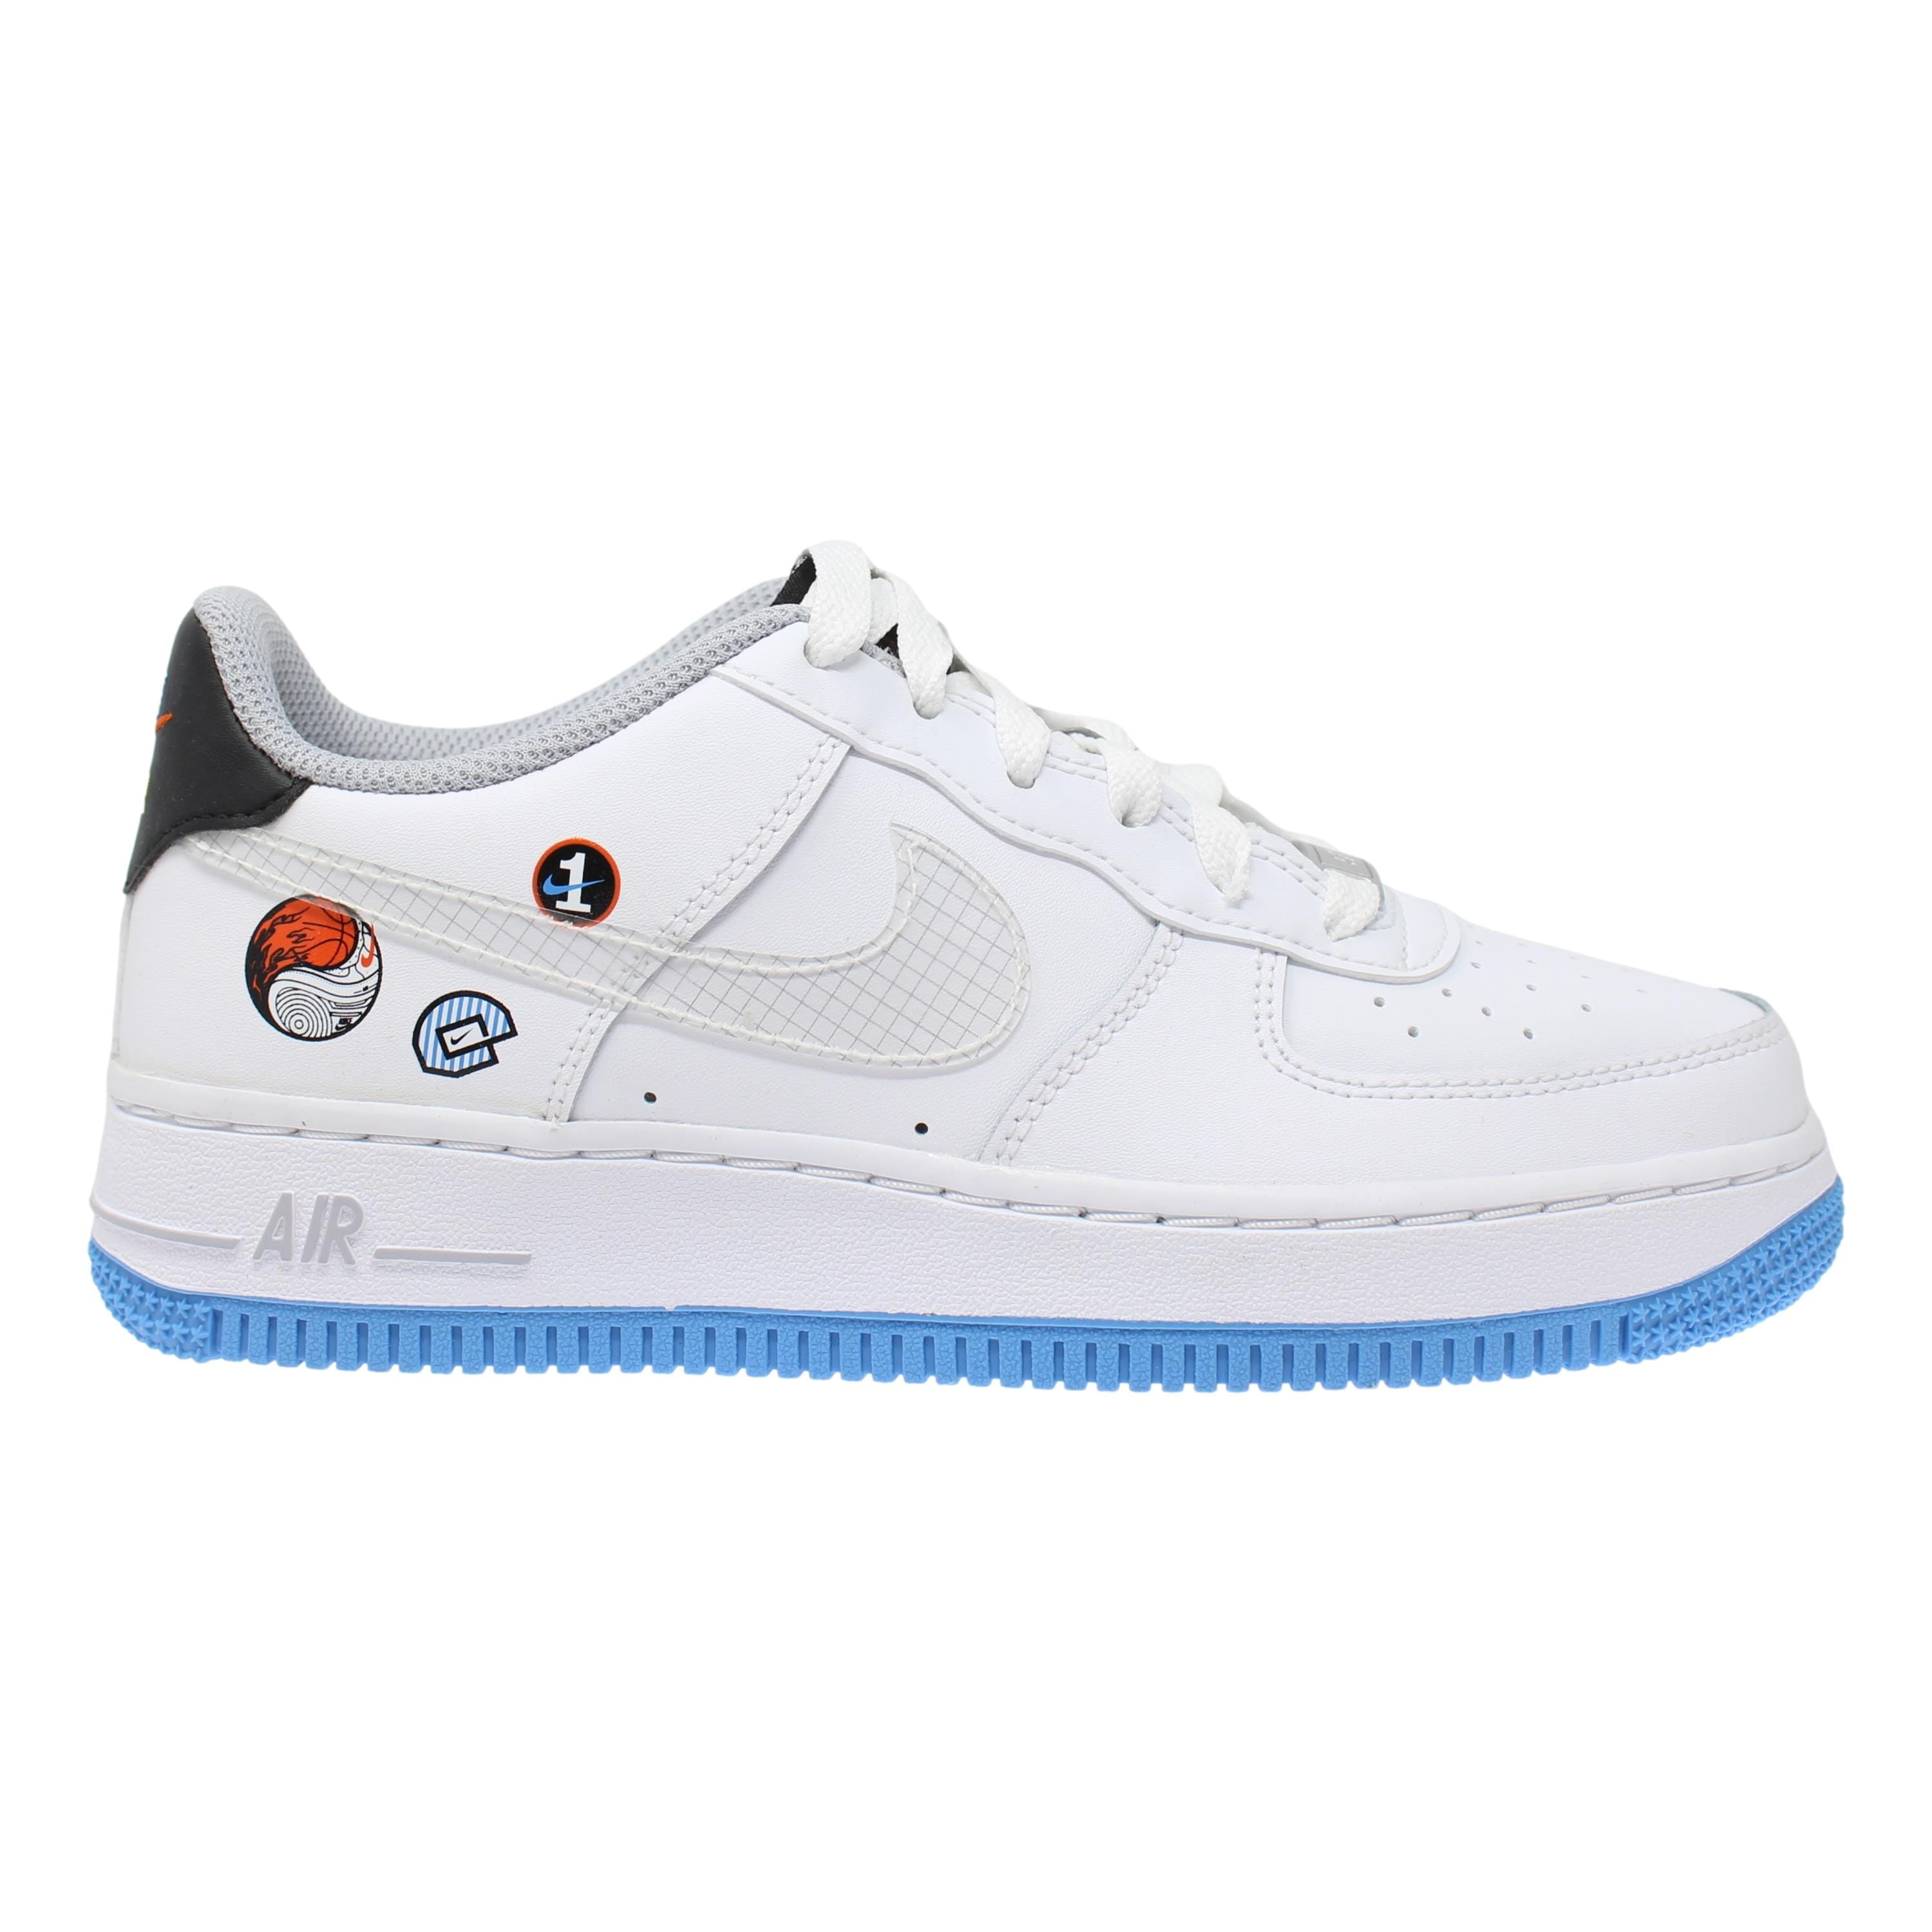 Nike Air Force 1 LV8 1 White/Multi-Color-Wolf Grey DM8088-100